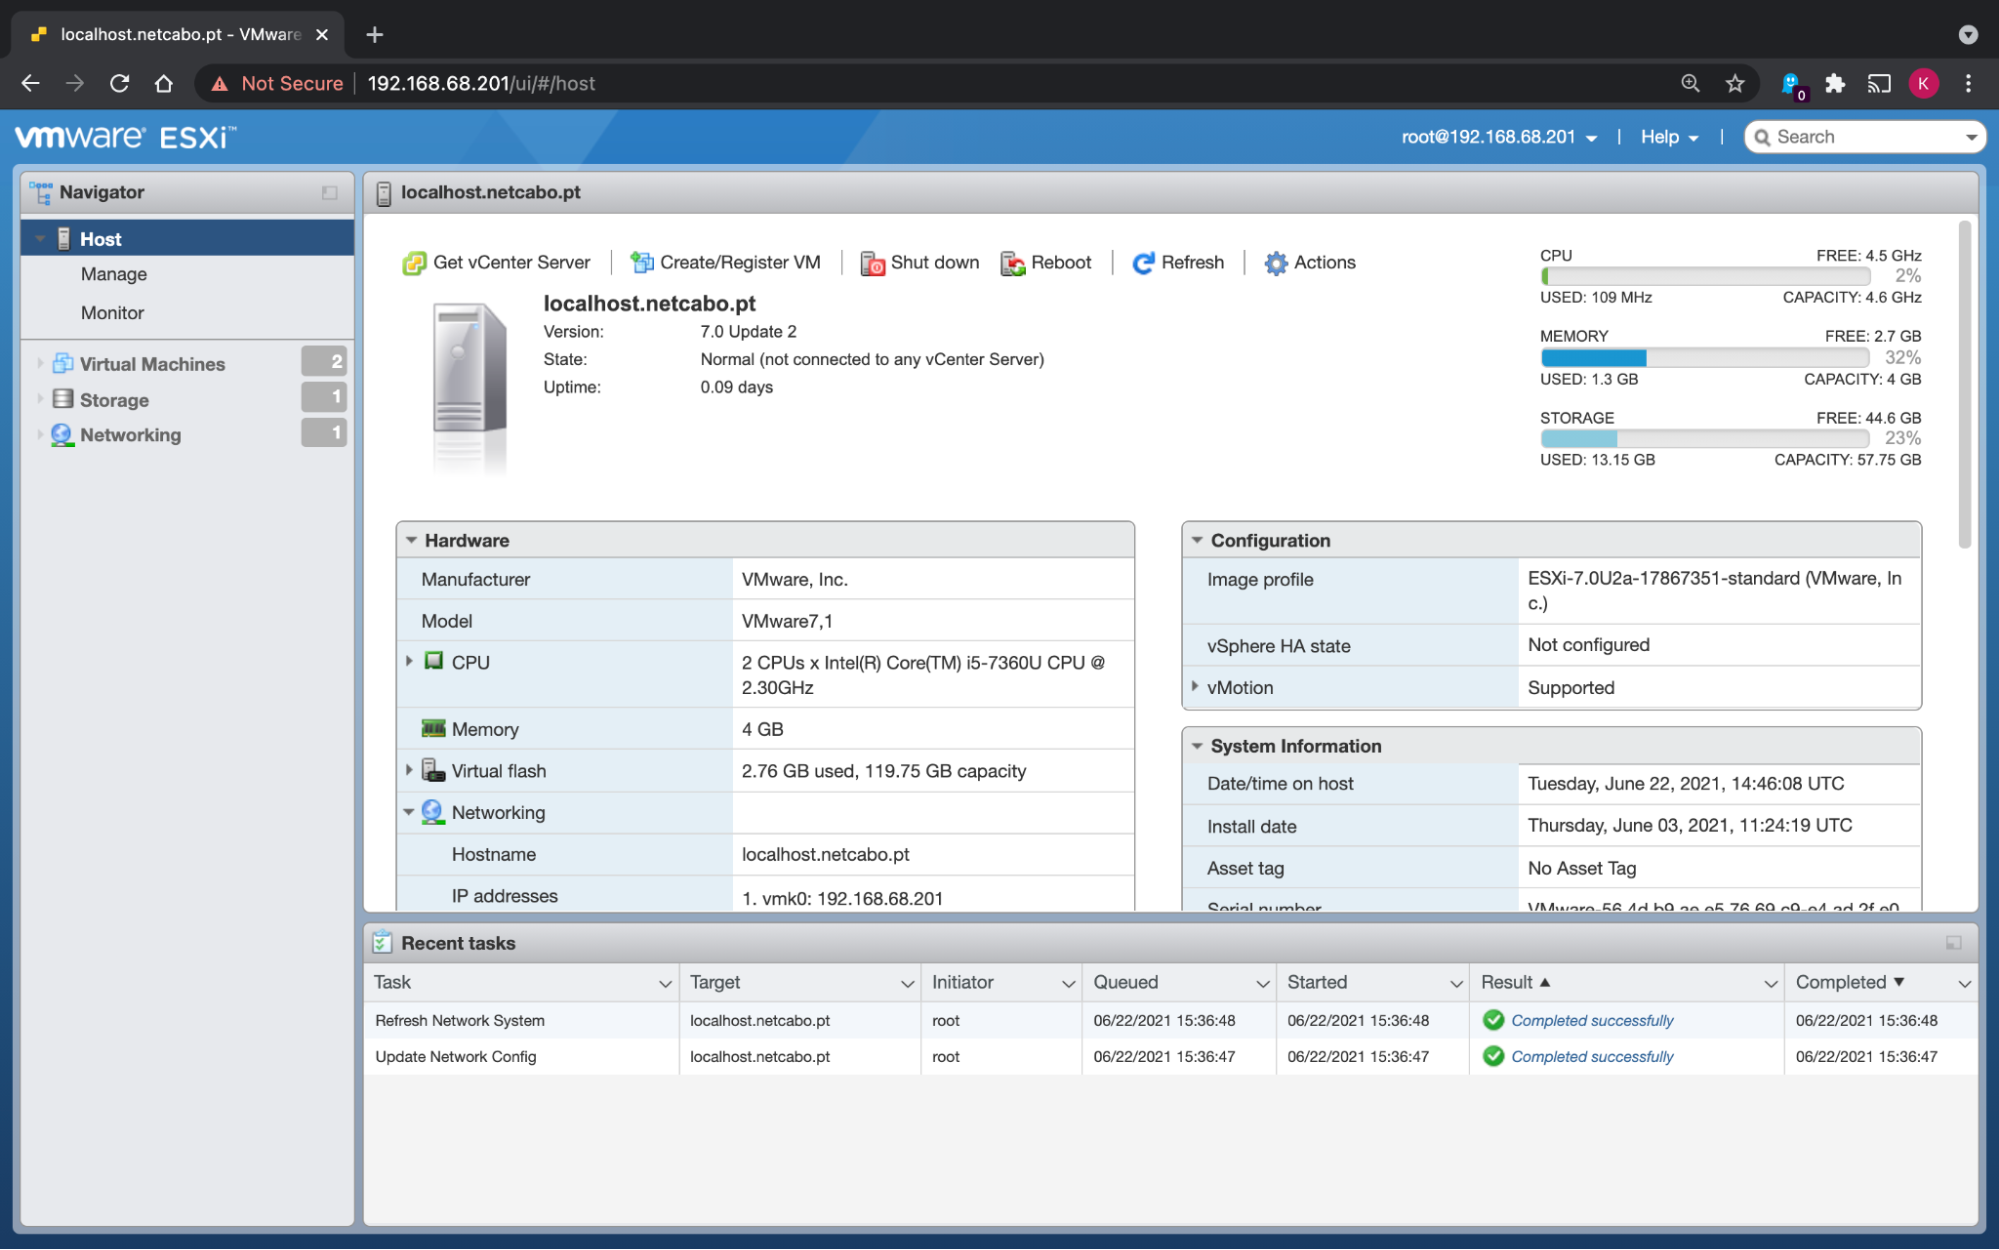 The dashboard has all of the options and statuses of your ESXi servers